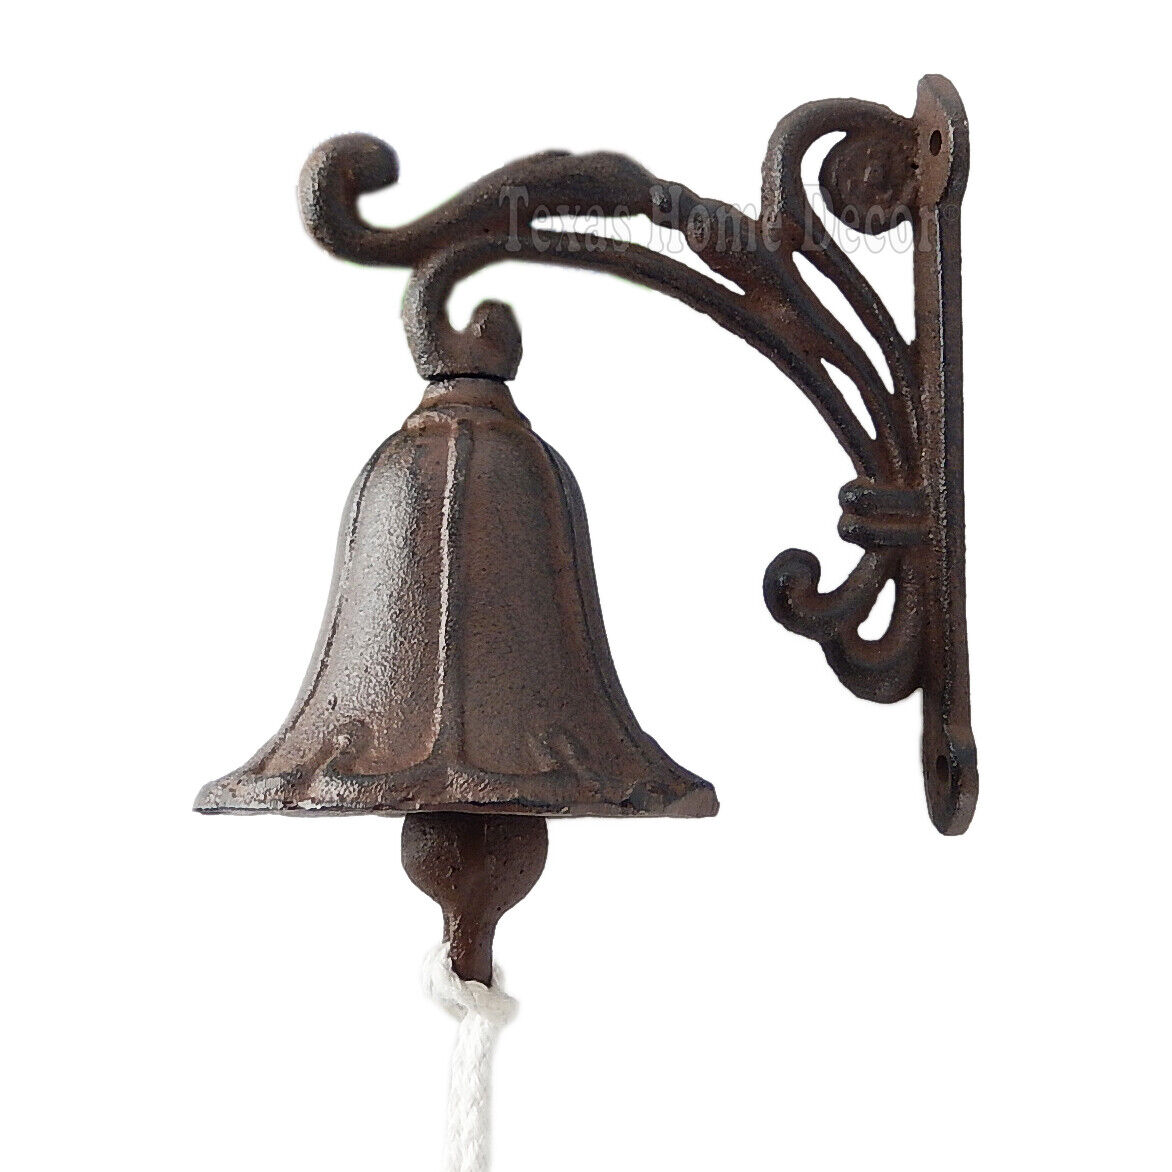 Vine Dinner Bell Cast Iron Wall Mount Antique Style Rustic Finish Scrolls 